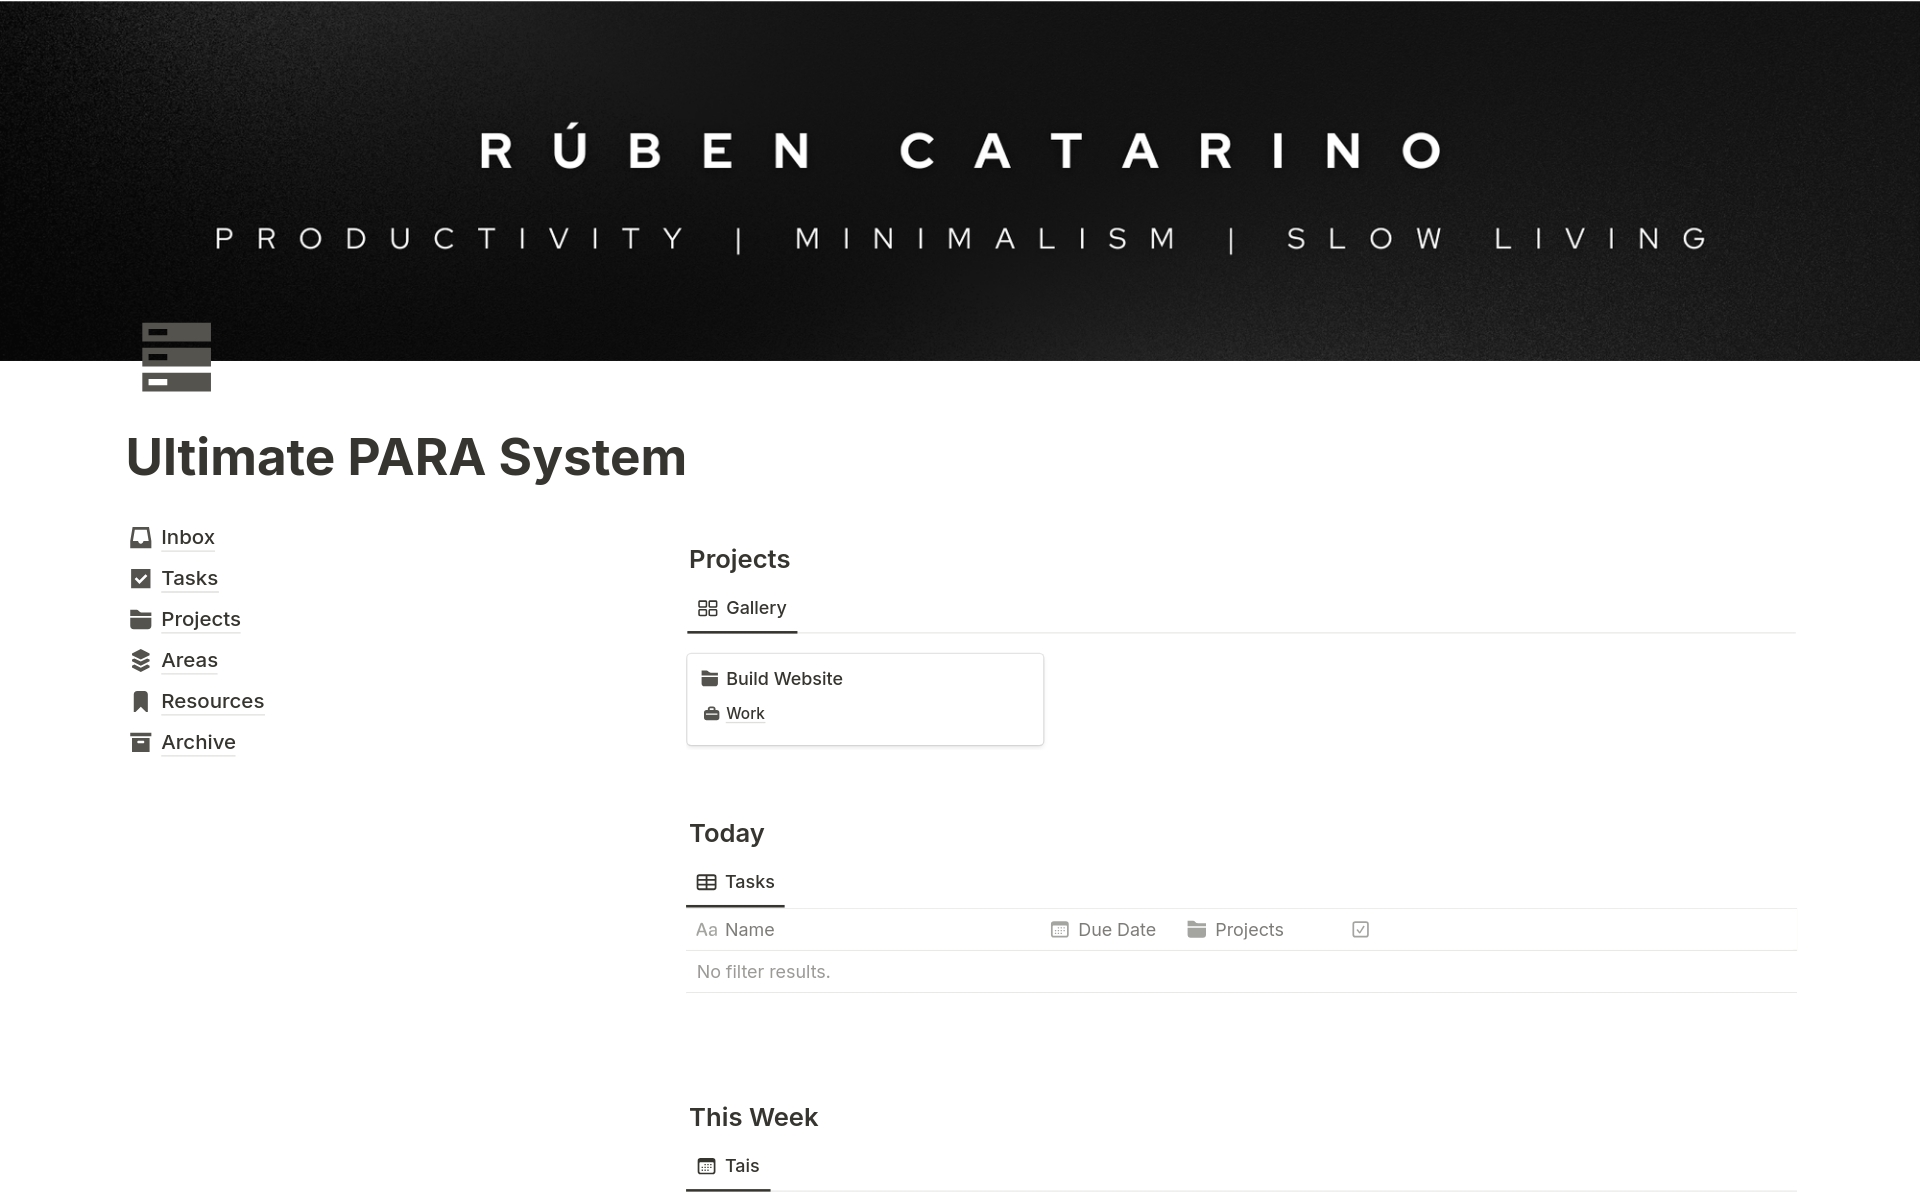 The Ultimate PARA System is a Notion system that helps you manage your information in an unique digital space.